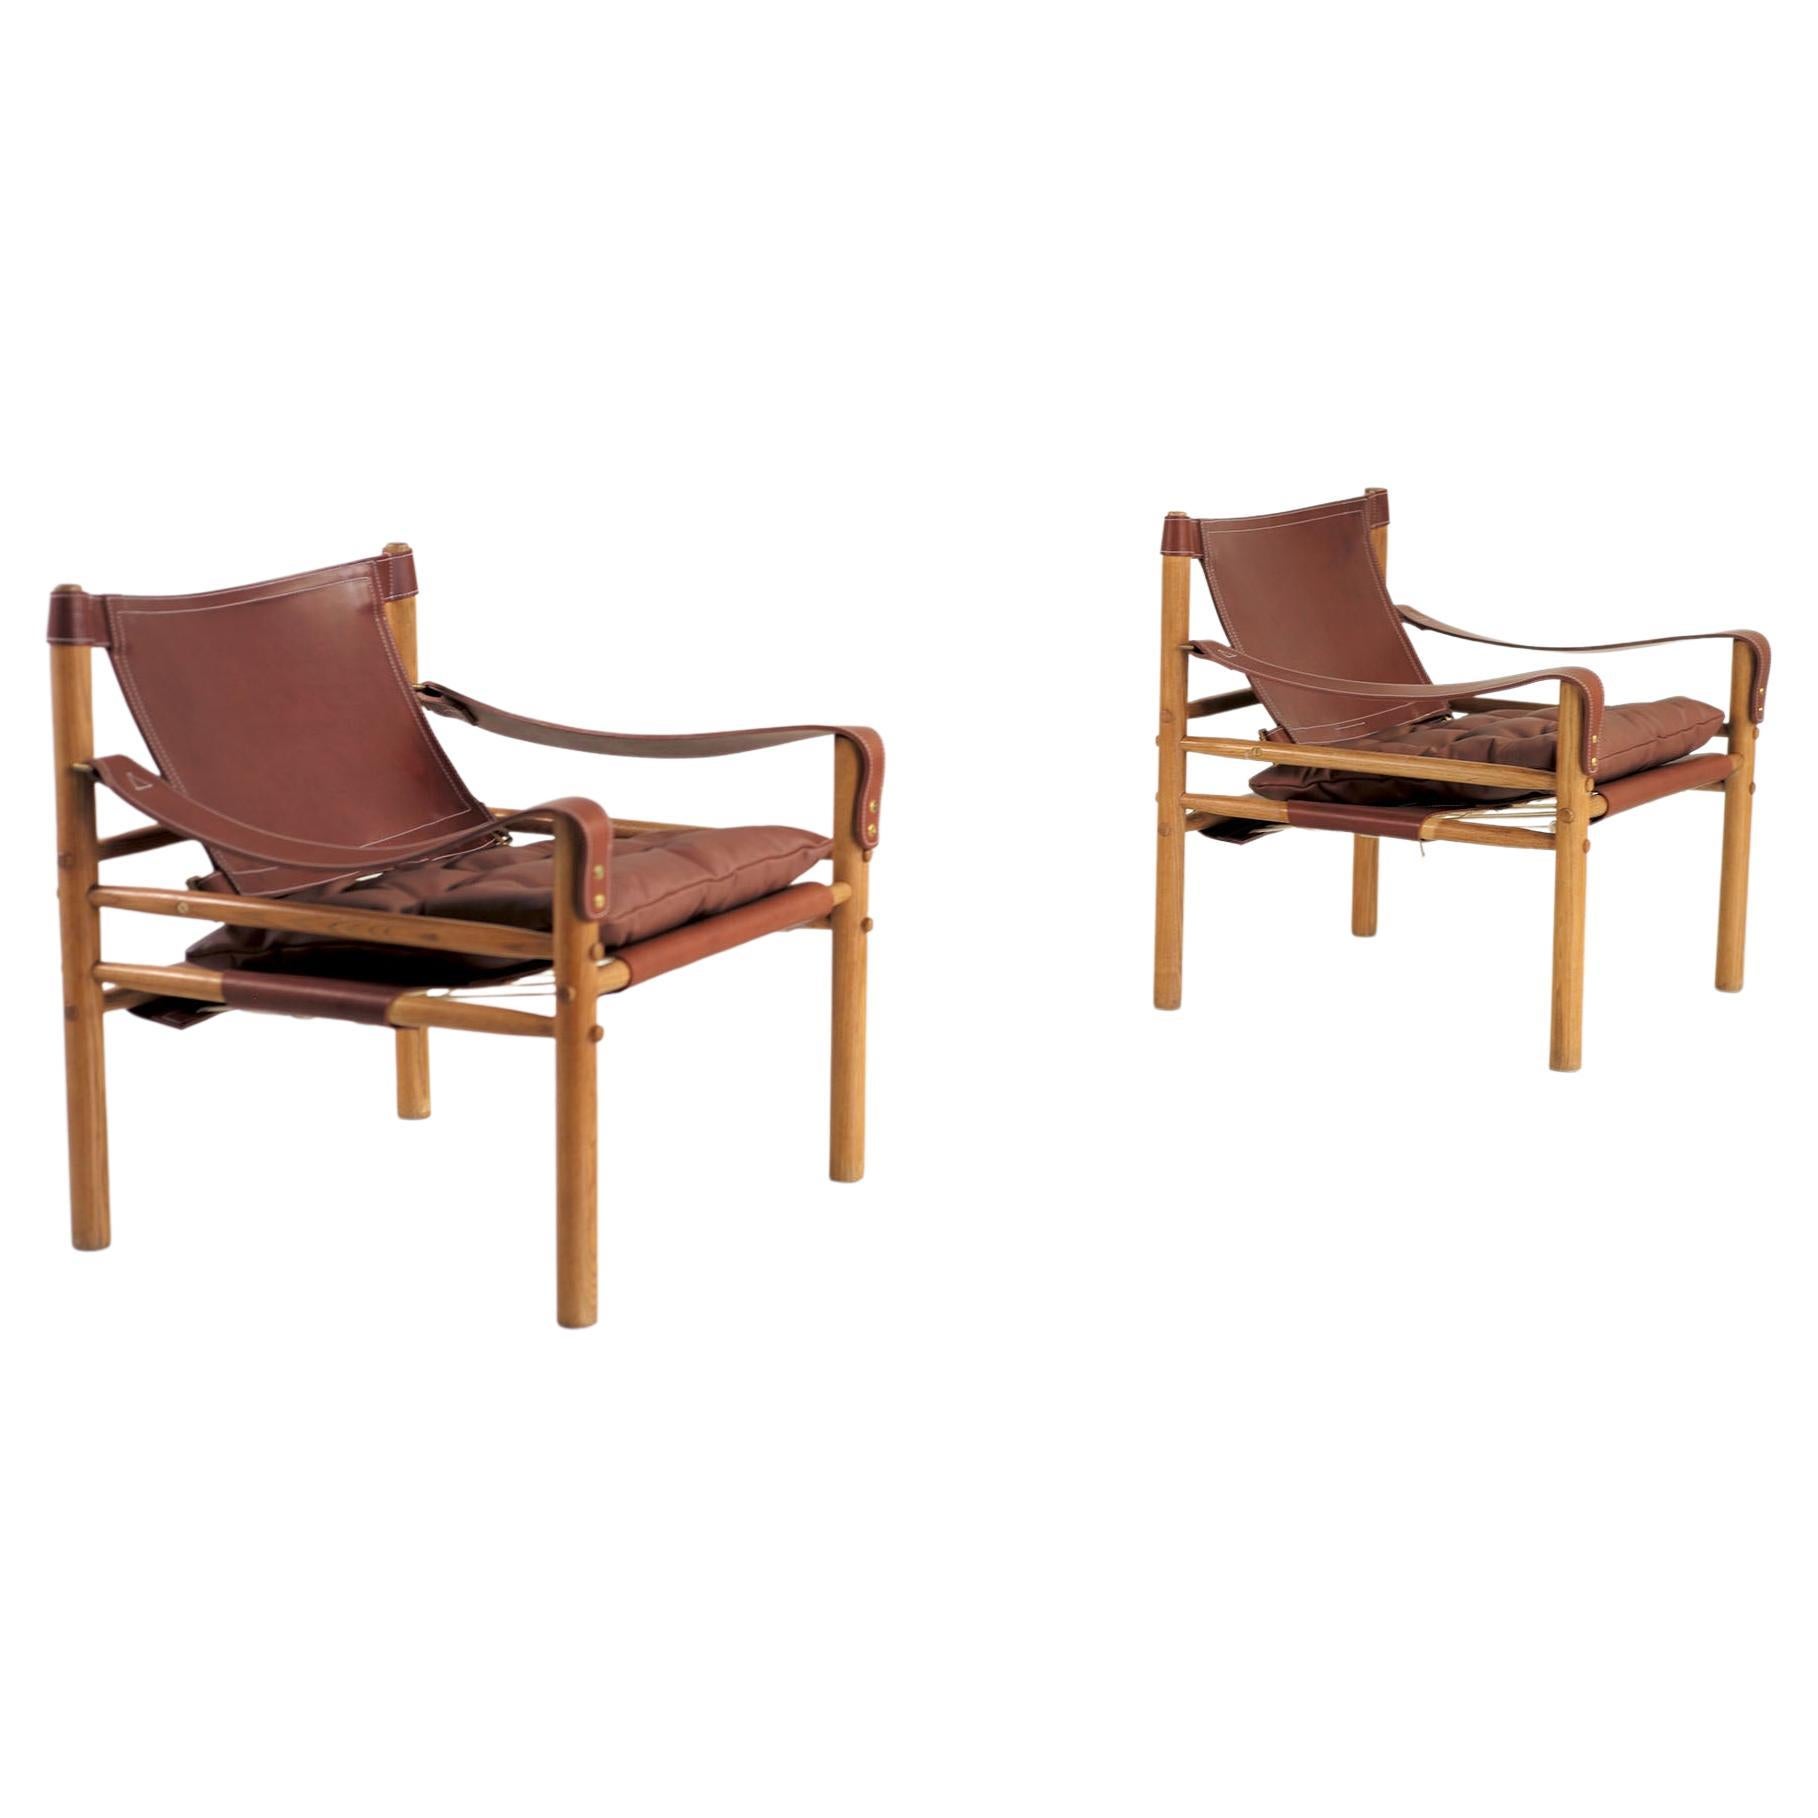 Arne Norell, Pair of "Sirocco" Armchairs, Sweden 1964